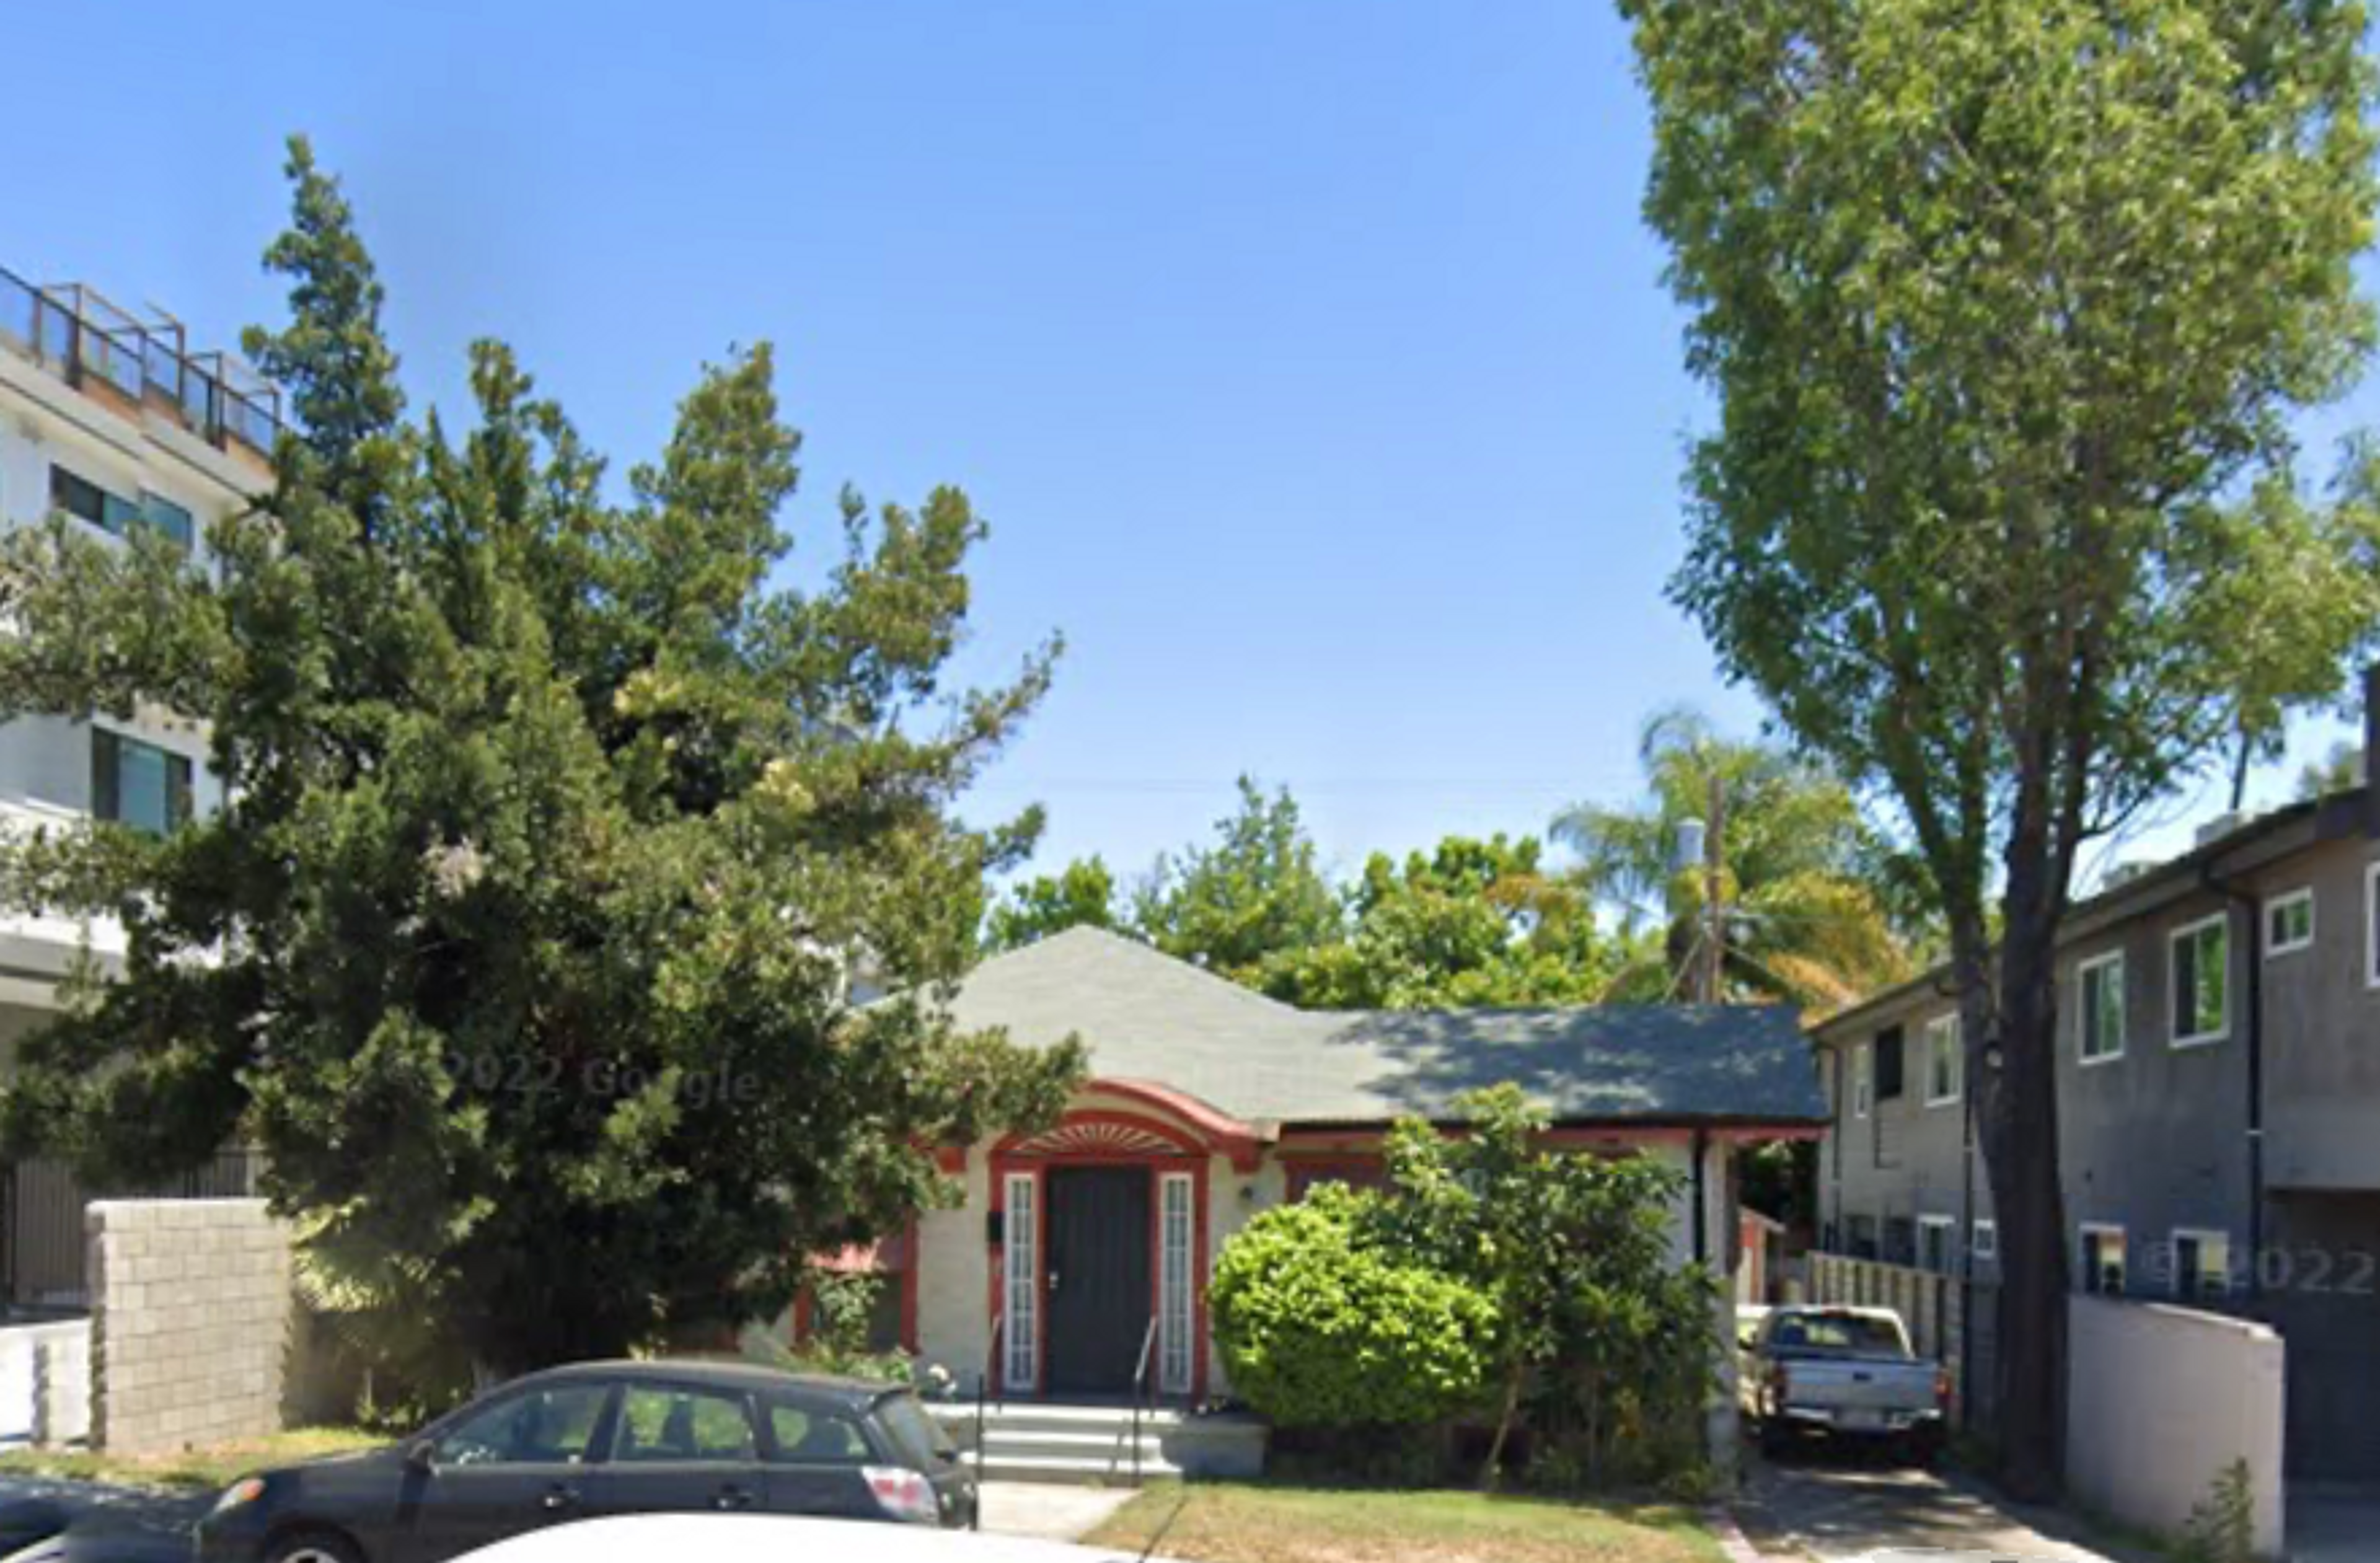 1346 North Fairfax Avenue, a 1919 bungalow flanked by mature trees and two taller buildings. The house has burned down. Image courtesy of Google Maps.